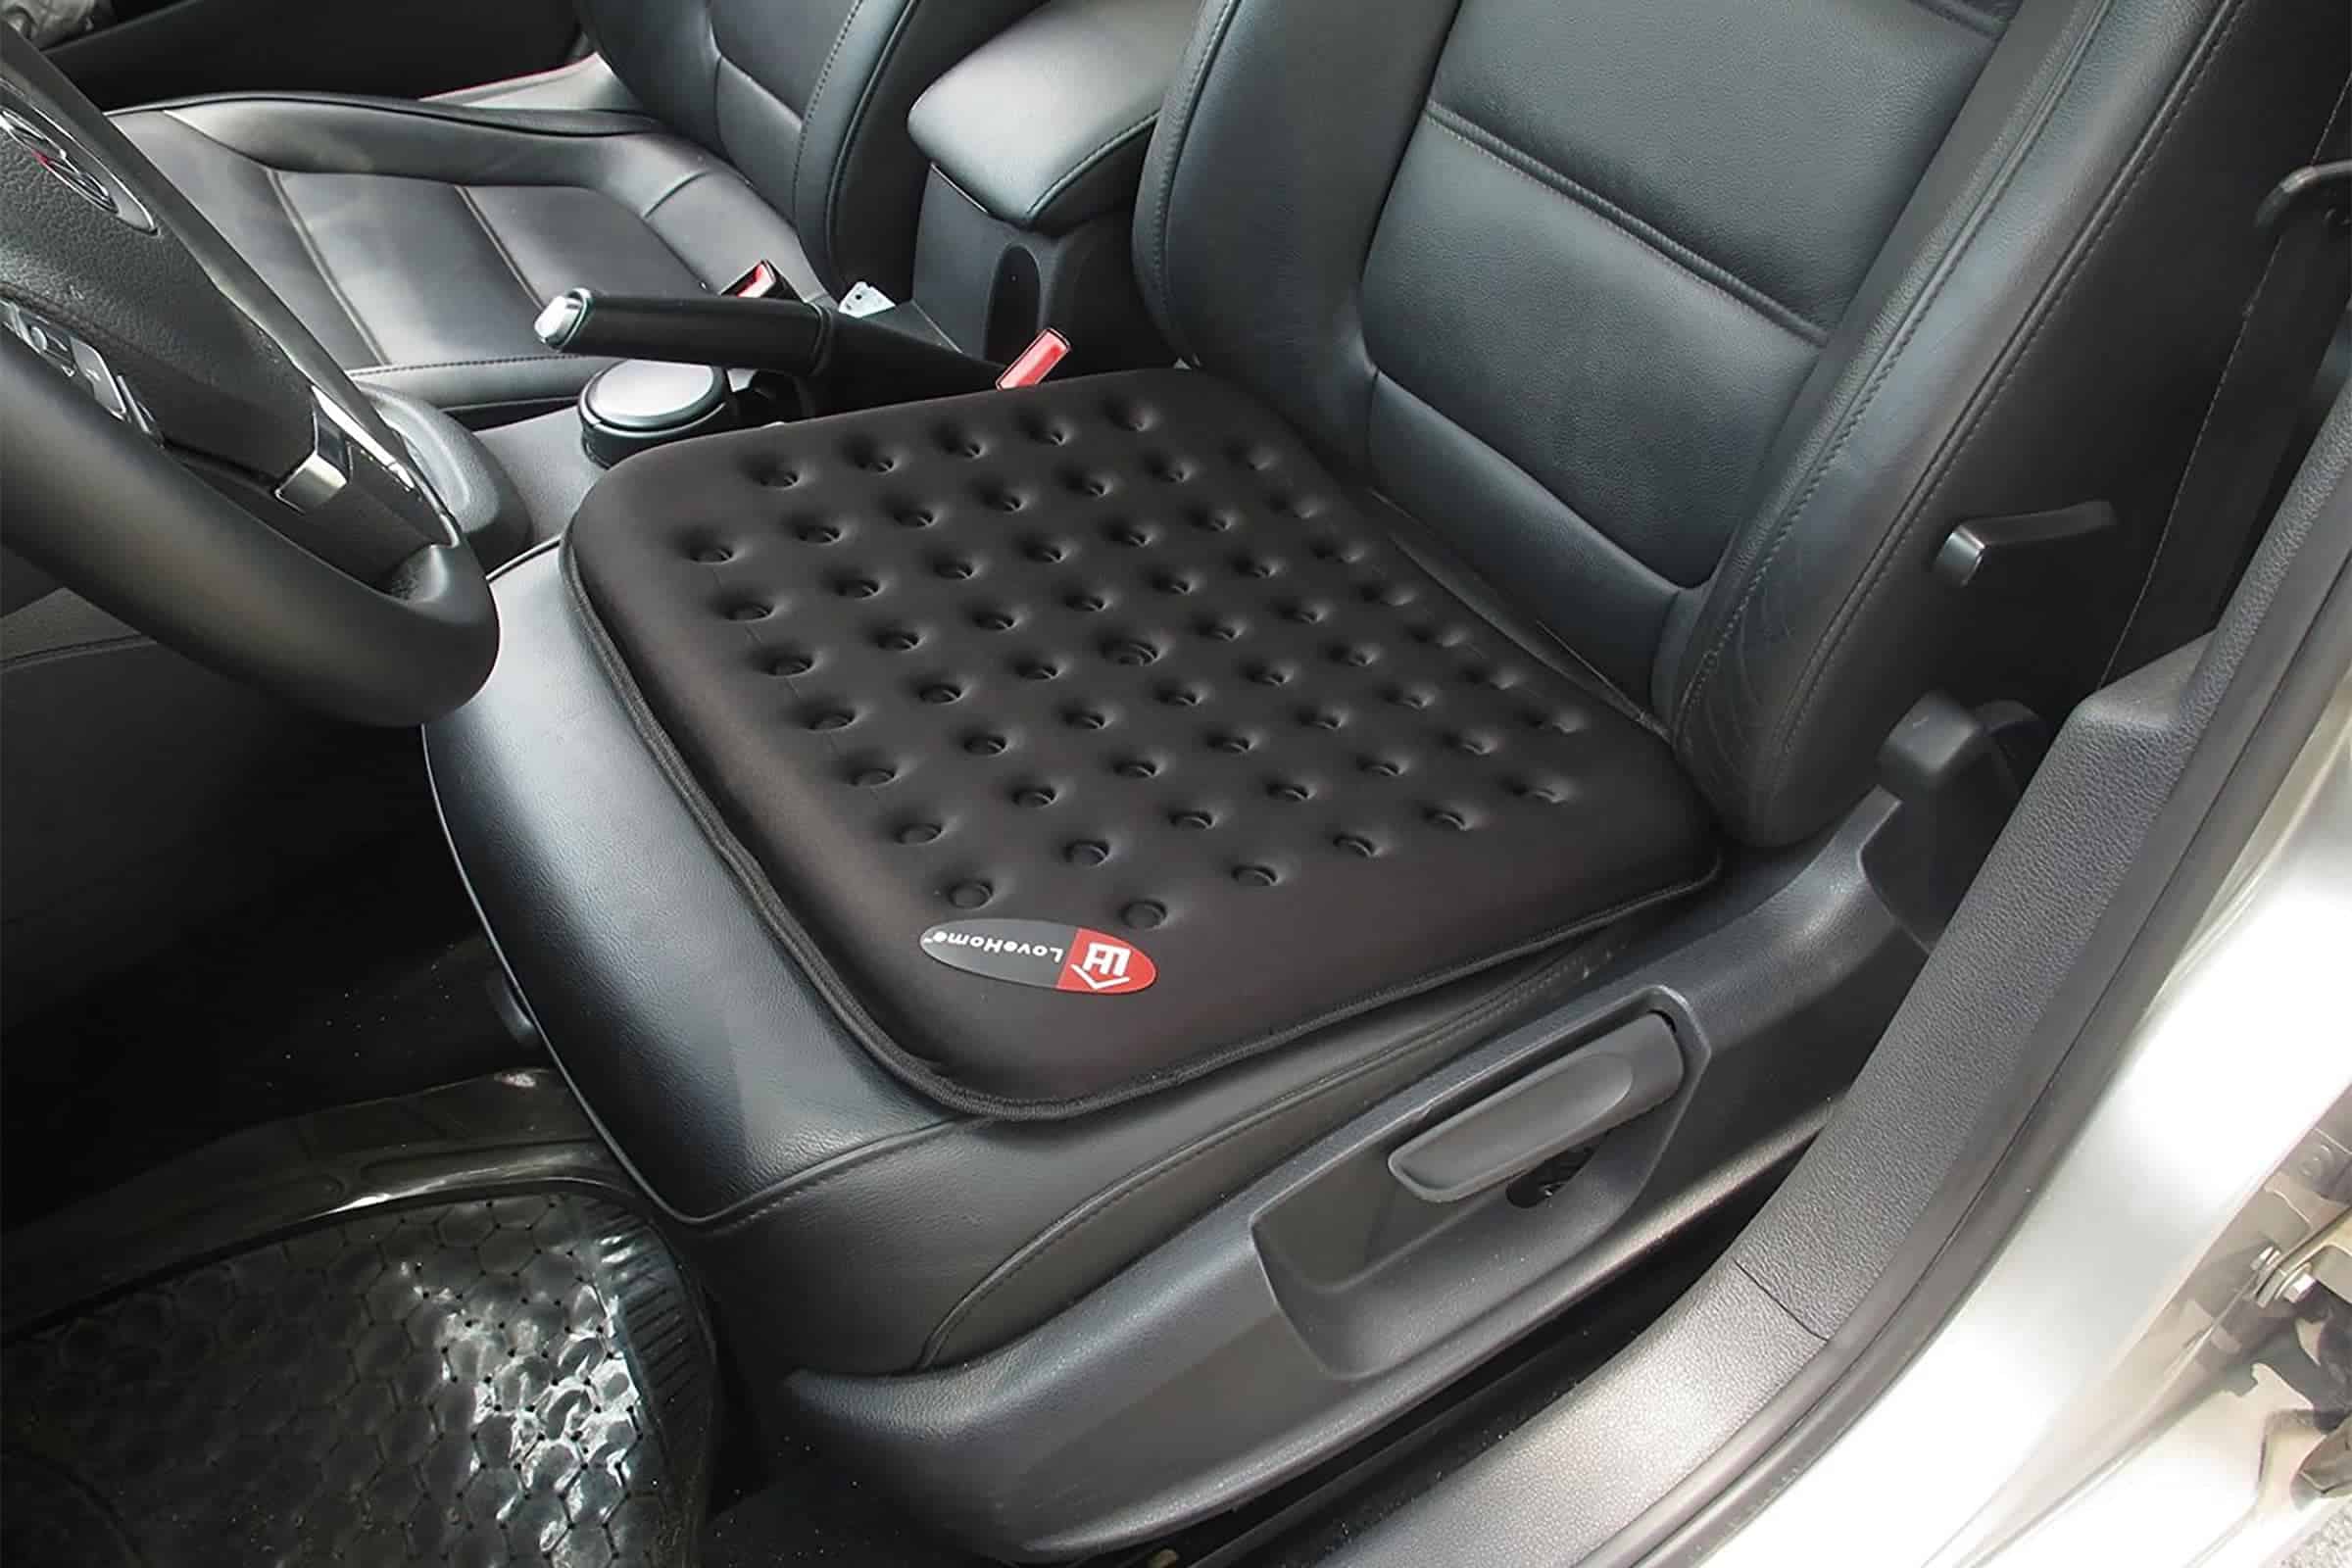 Best Car Seat Cushion of 2020 (Review and Buying Guide)